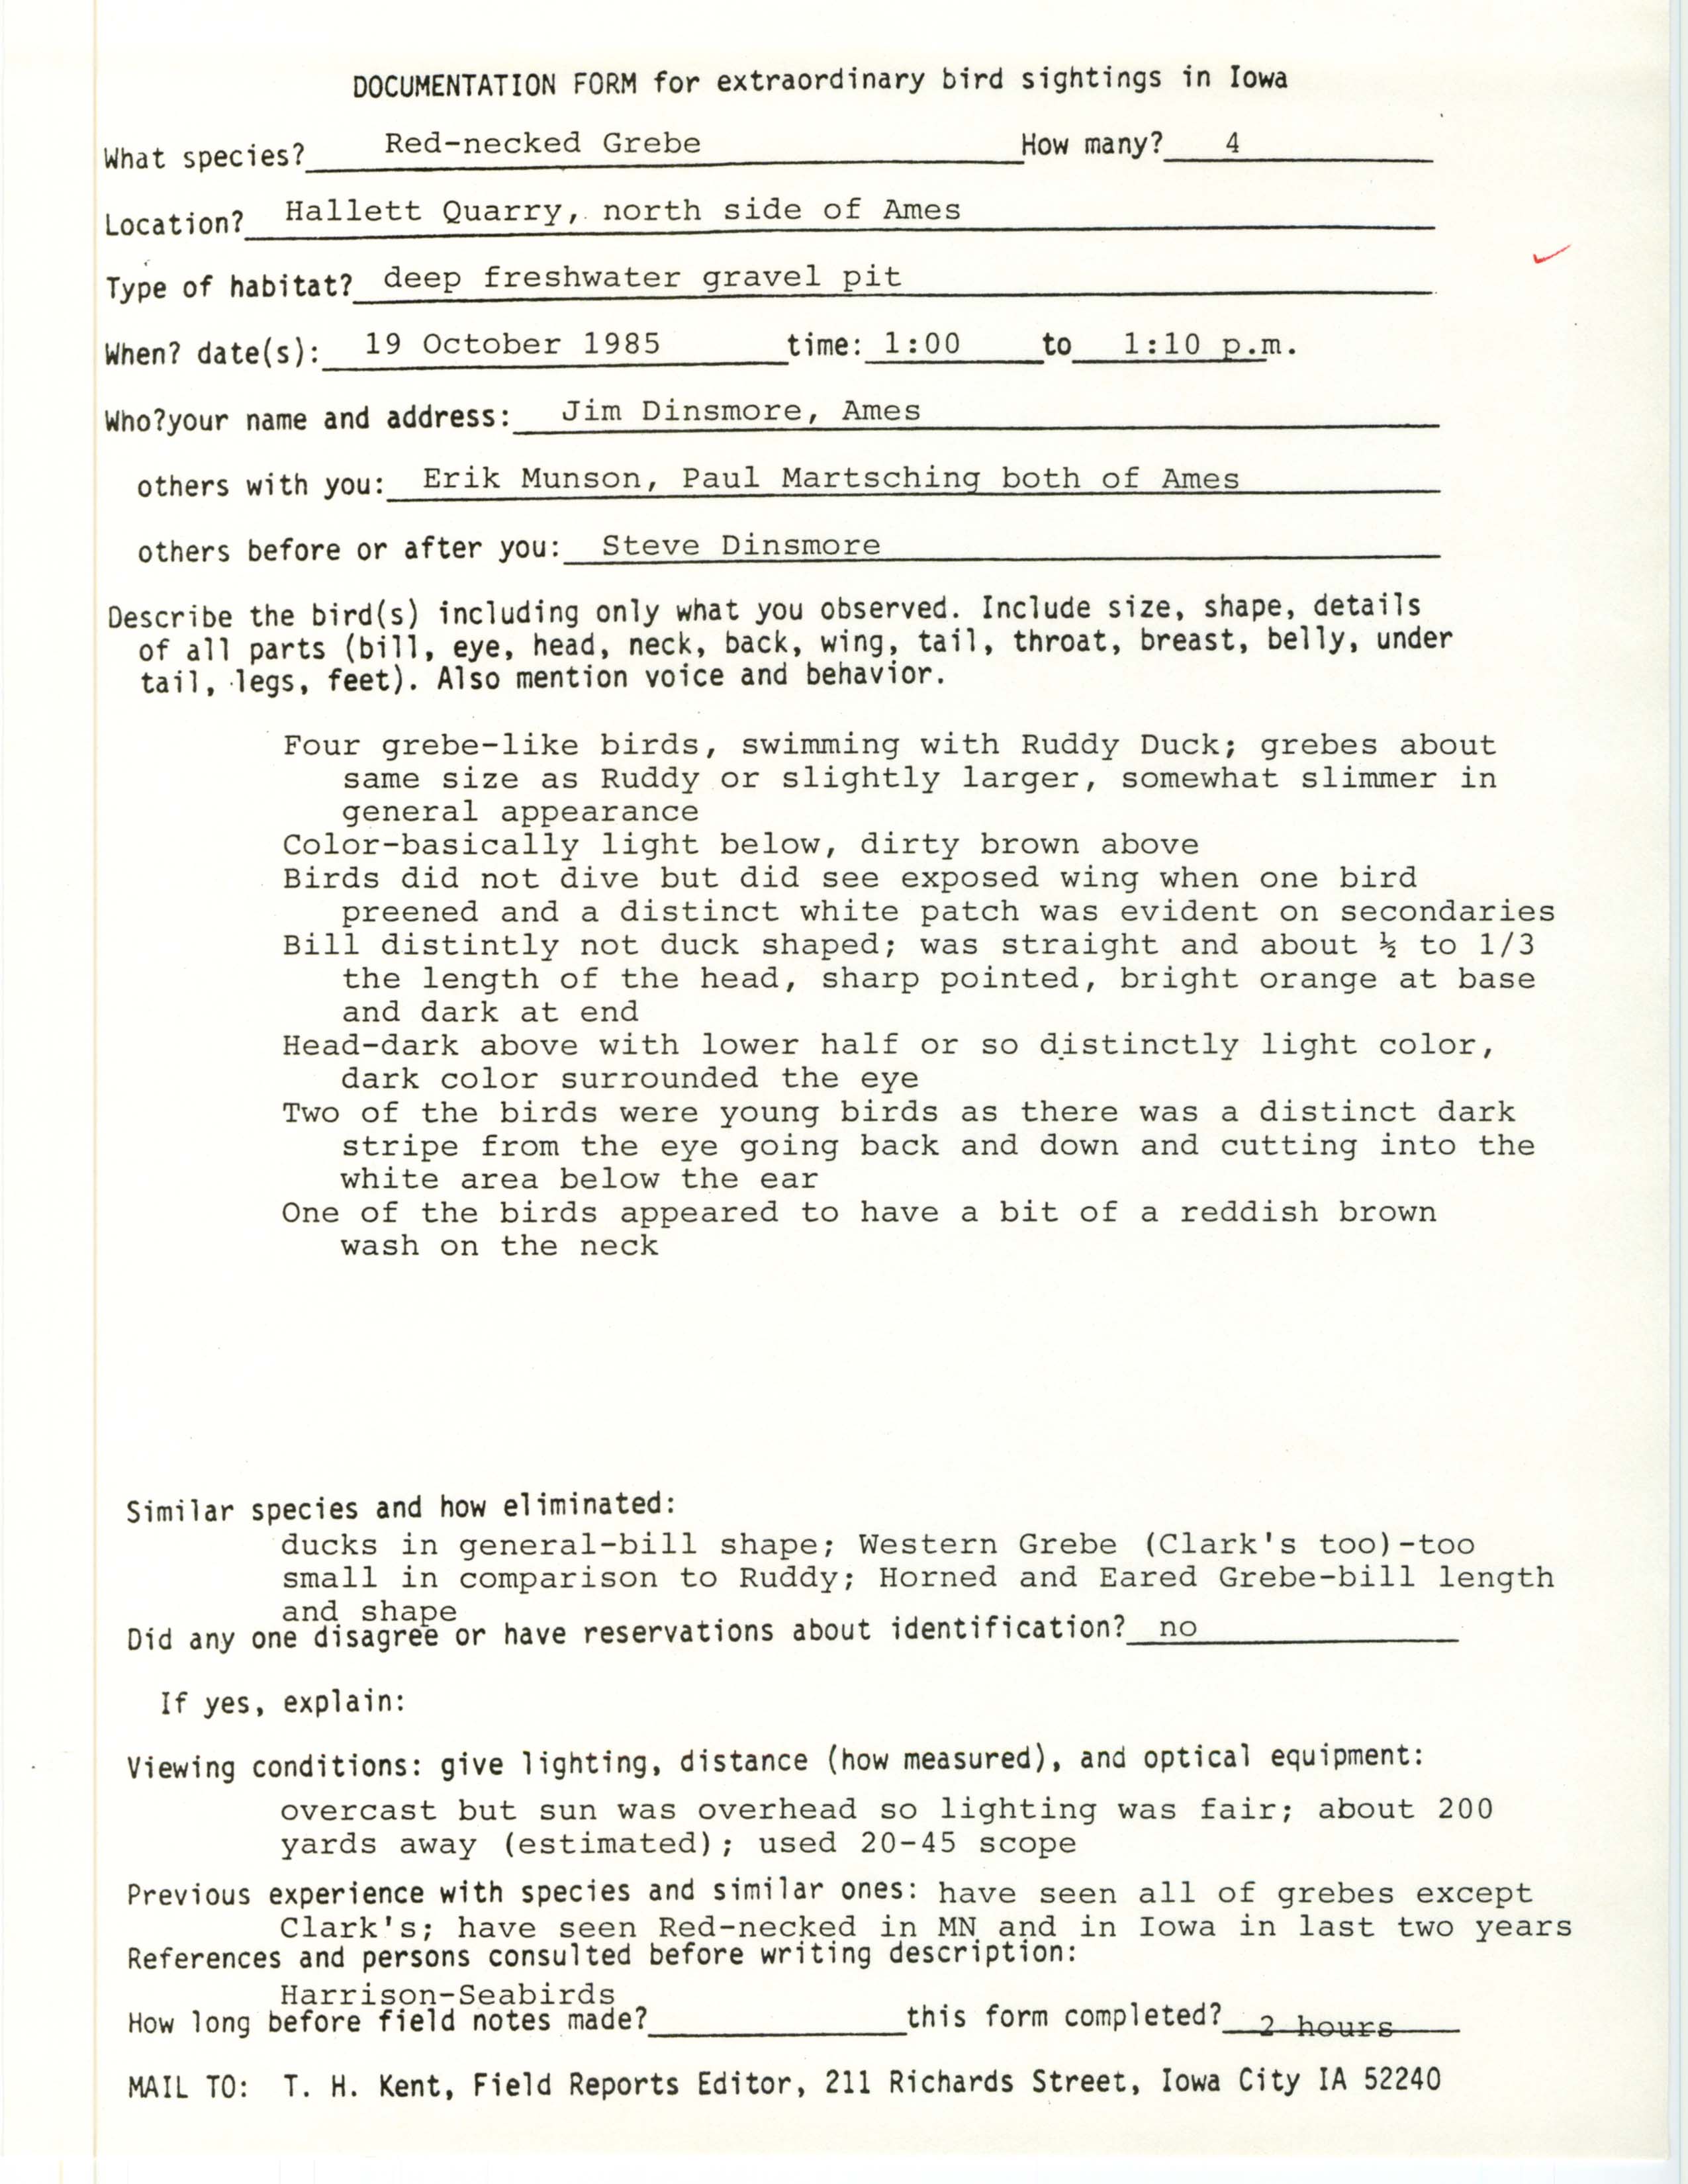 Rare bird documentation form for Red-necked Grebe at Hallett's Quarry at Ames, 1985